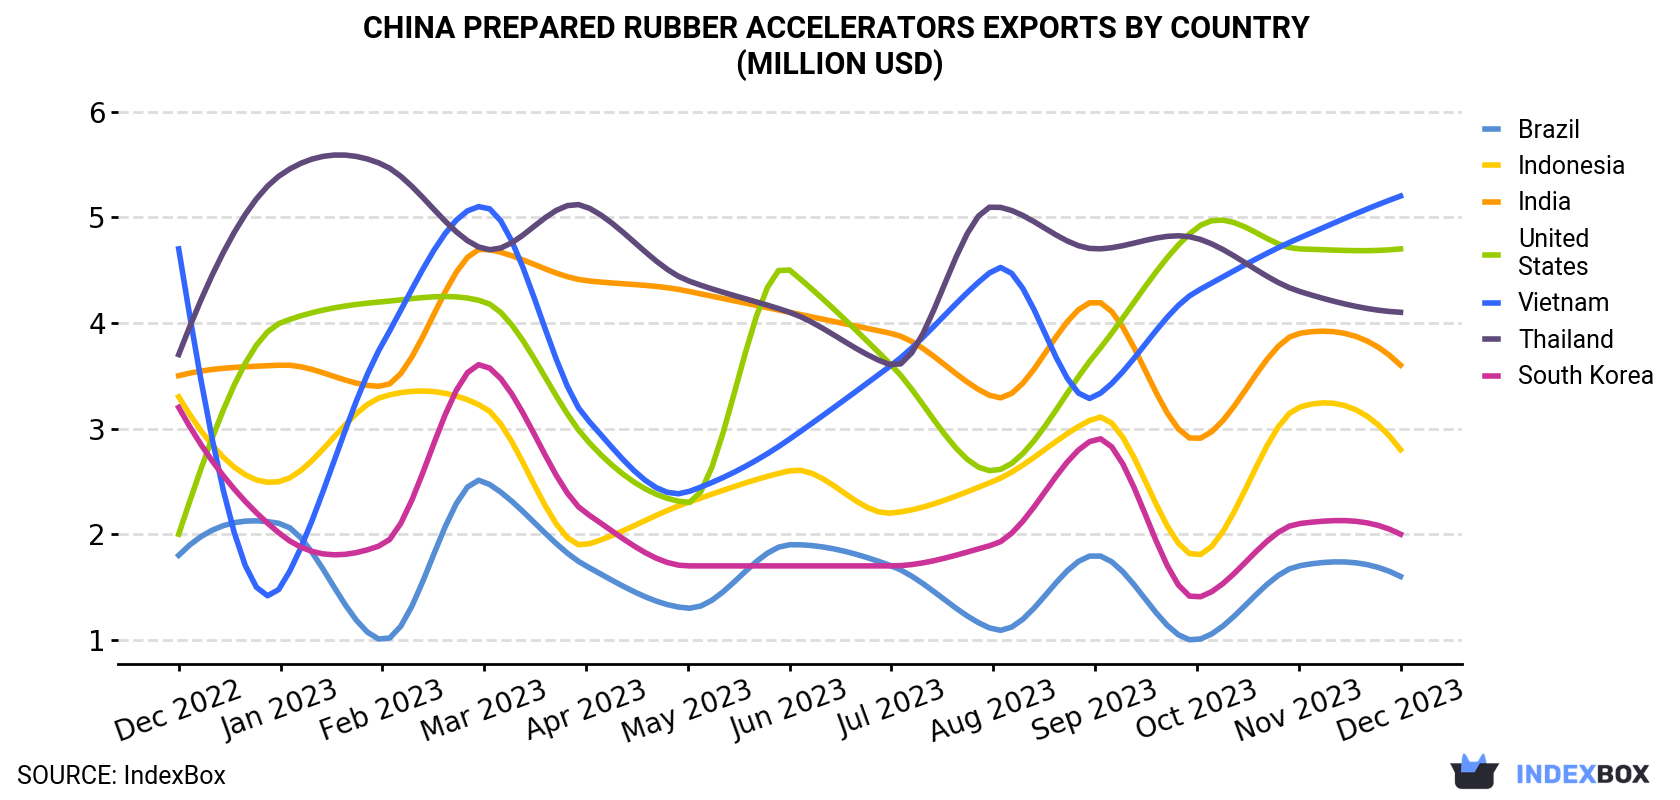 China Prepared Rubber Accelerators Exports By Country (Million USD)